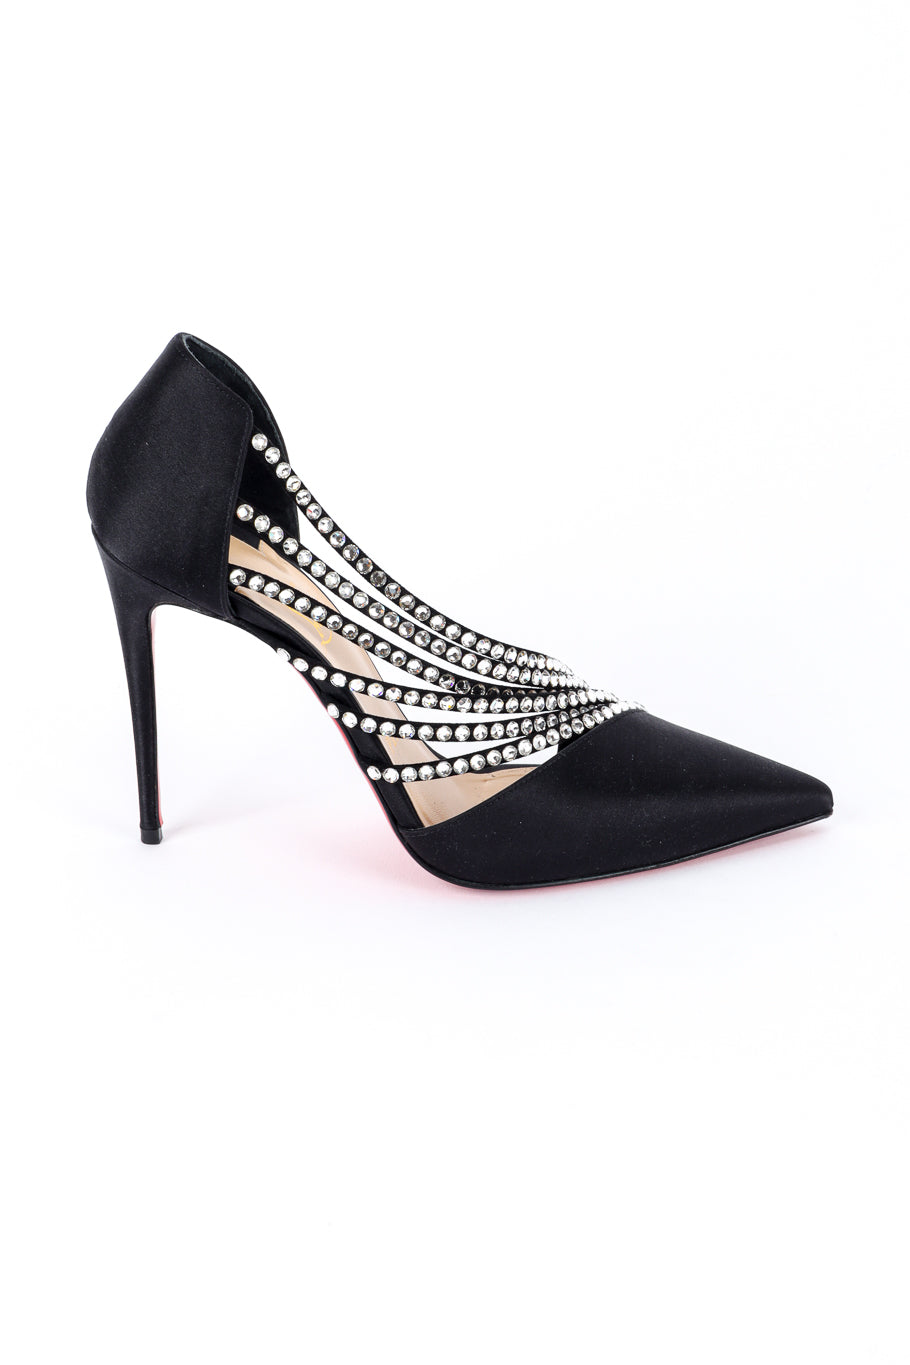 Christian Louboutin Crystal Strass Satin Pumps right shoe outer side @recess la